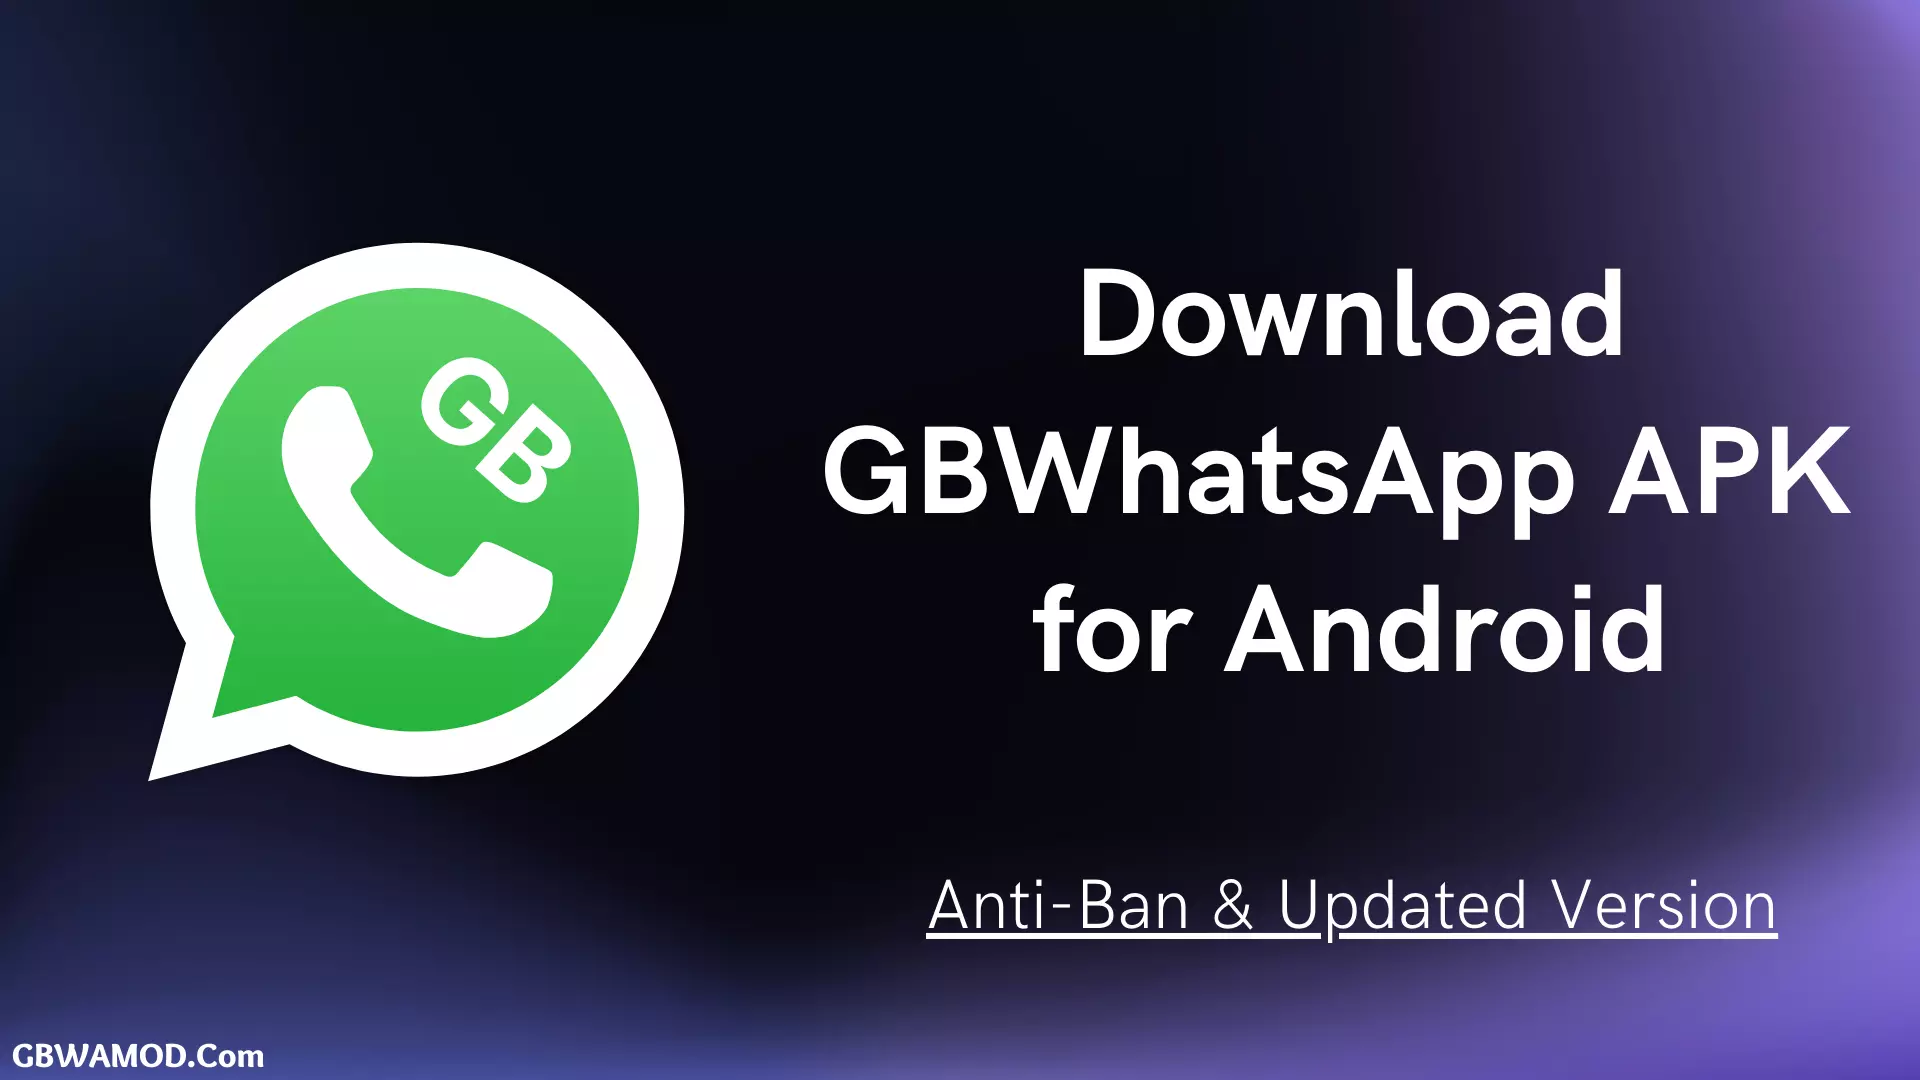 Download GBWhatsApp APK from here